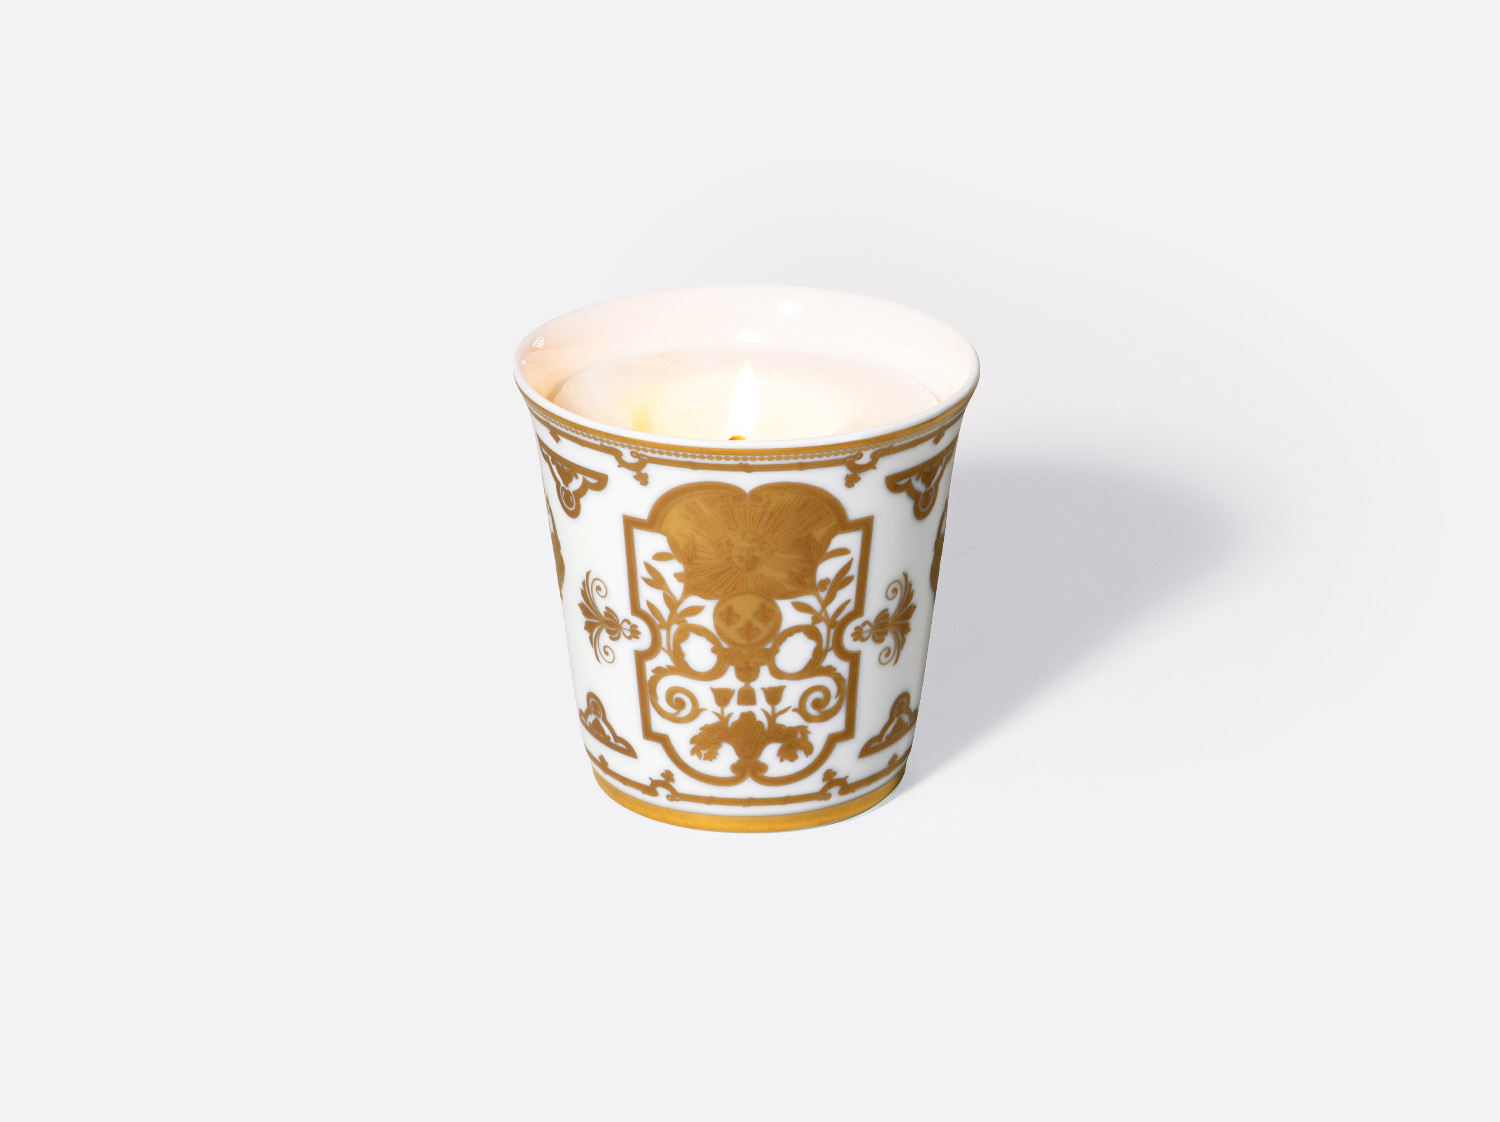 China Tumbler + candle home fragrance 200g of the collection Aux Rois Or | Bernardaud